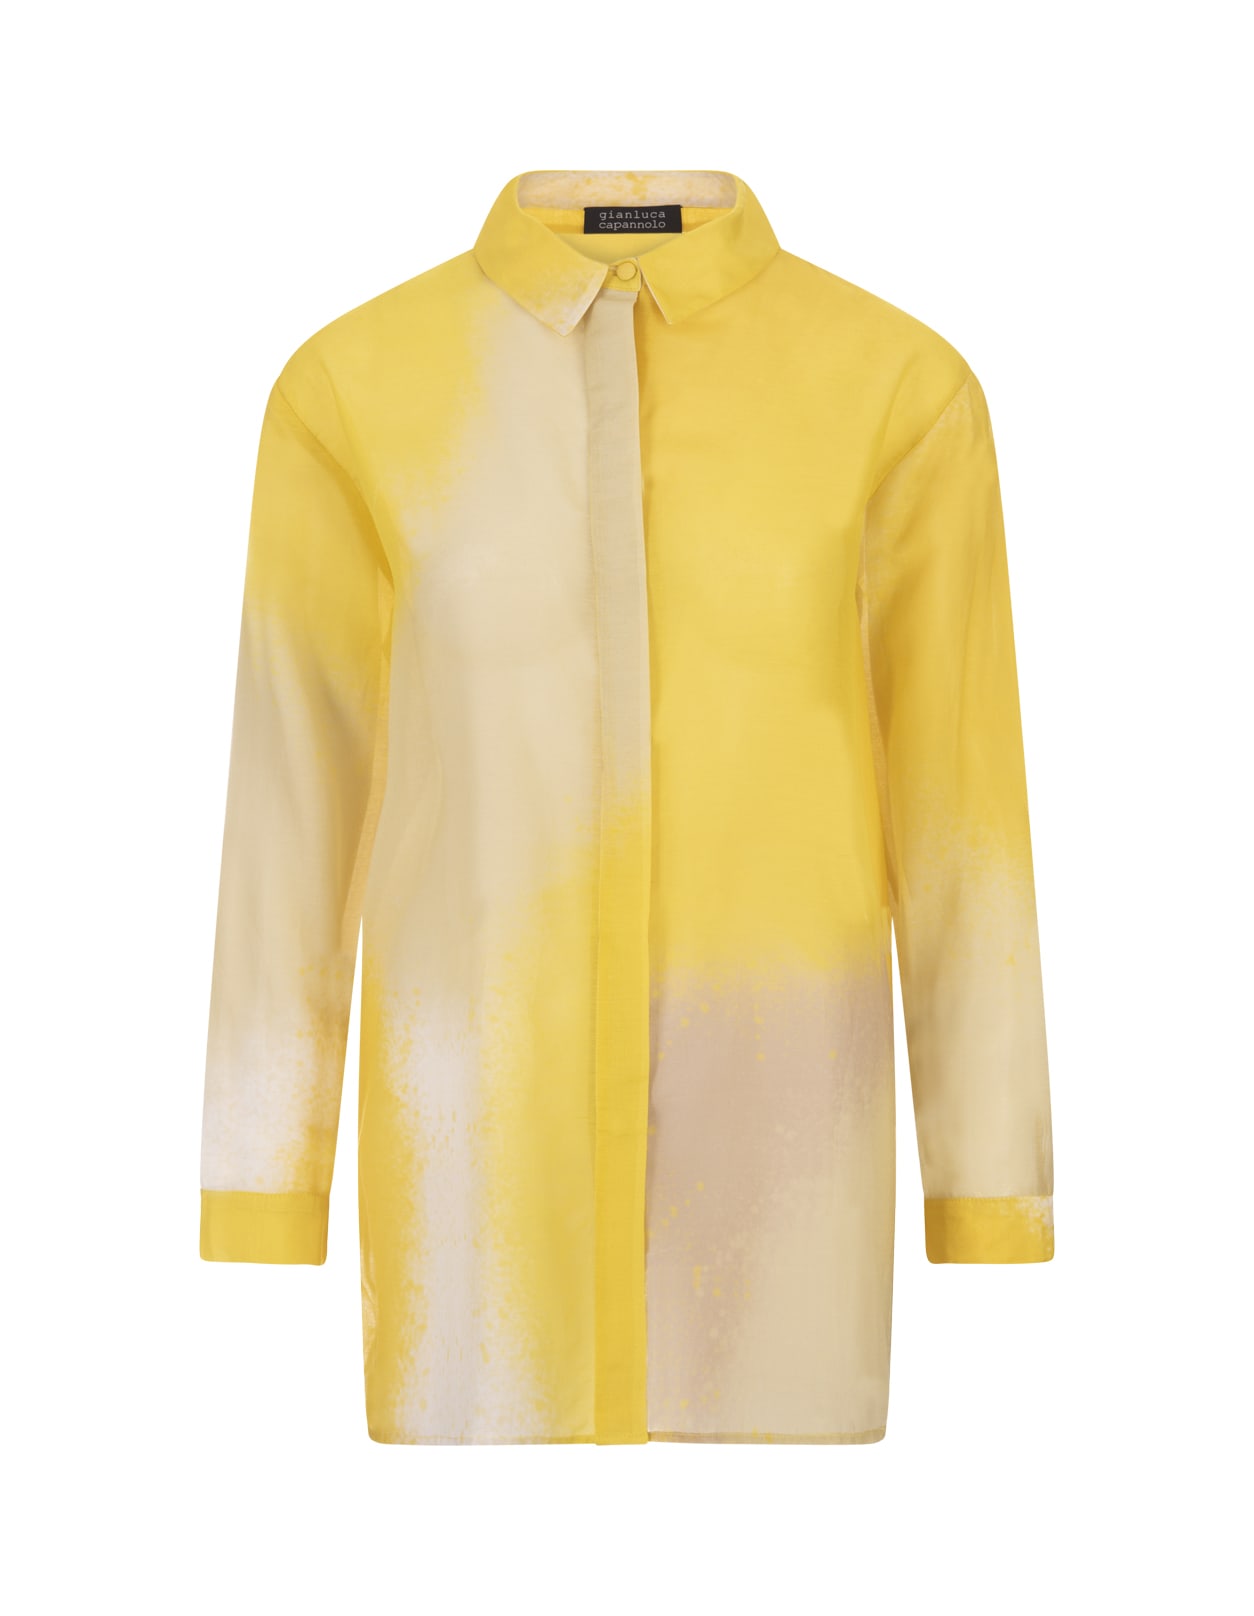 Gianluca Capannolo Shirt In Shaded Yellow Silk